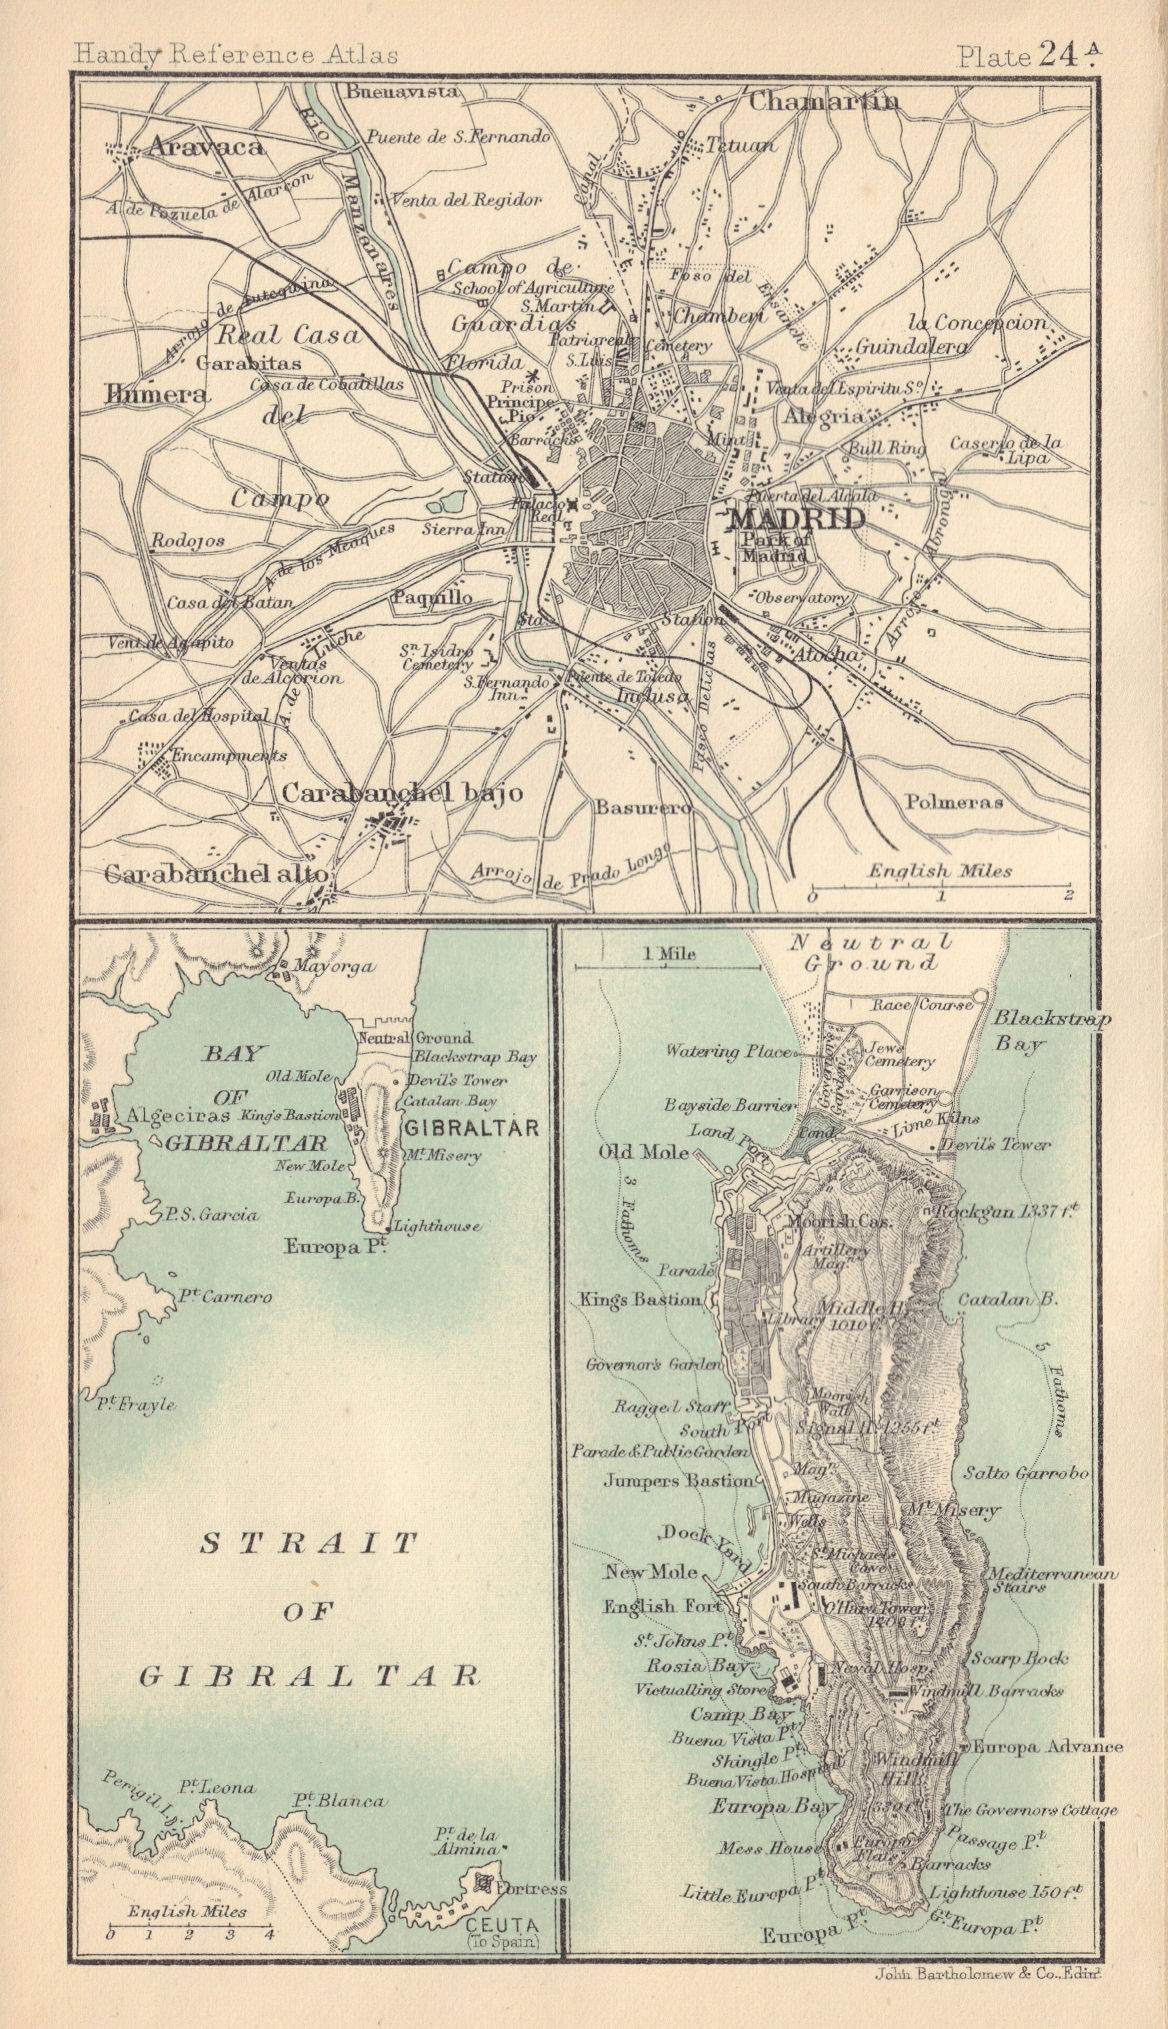 Associate Product Environs of Madrid & Gibraltar. Spain. BARTHOLOMEW 1898 old antique map chart